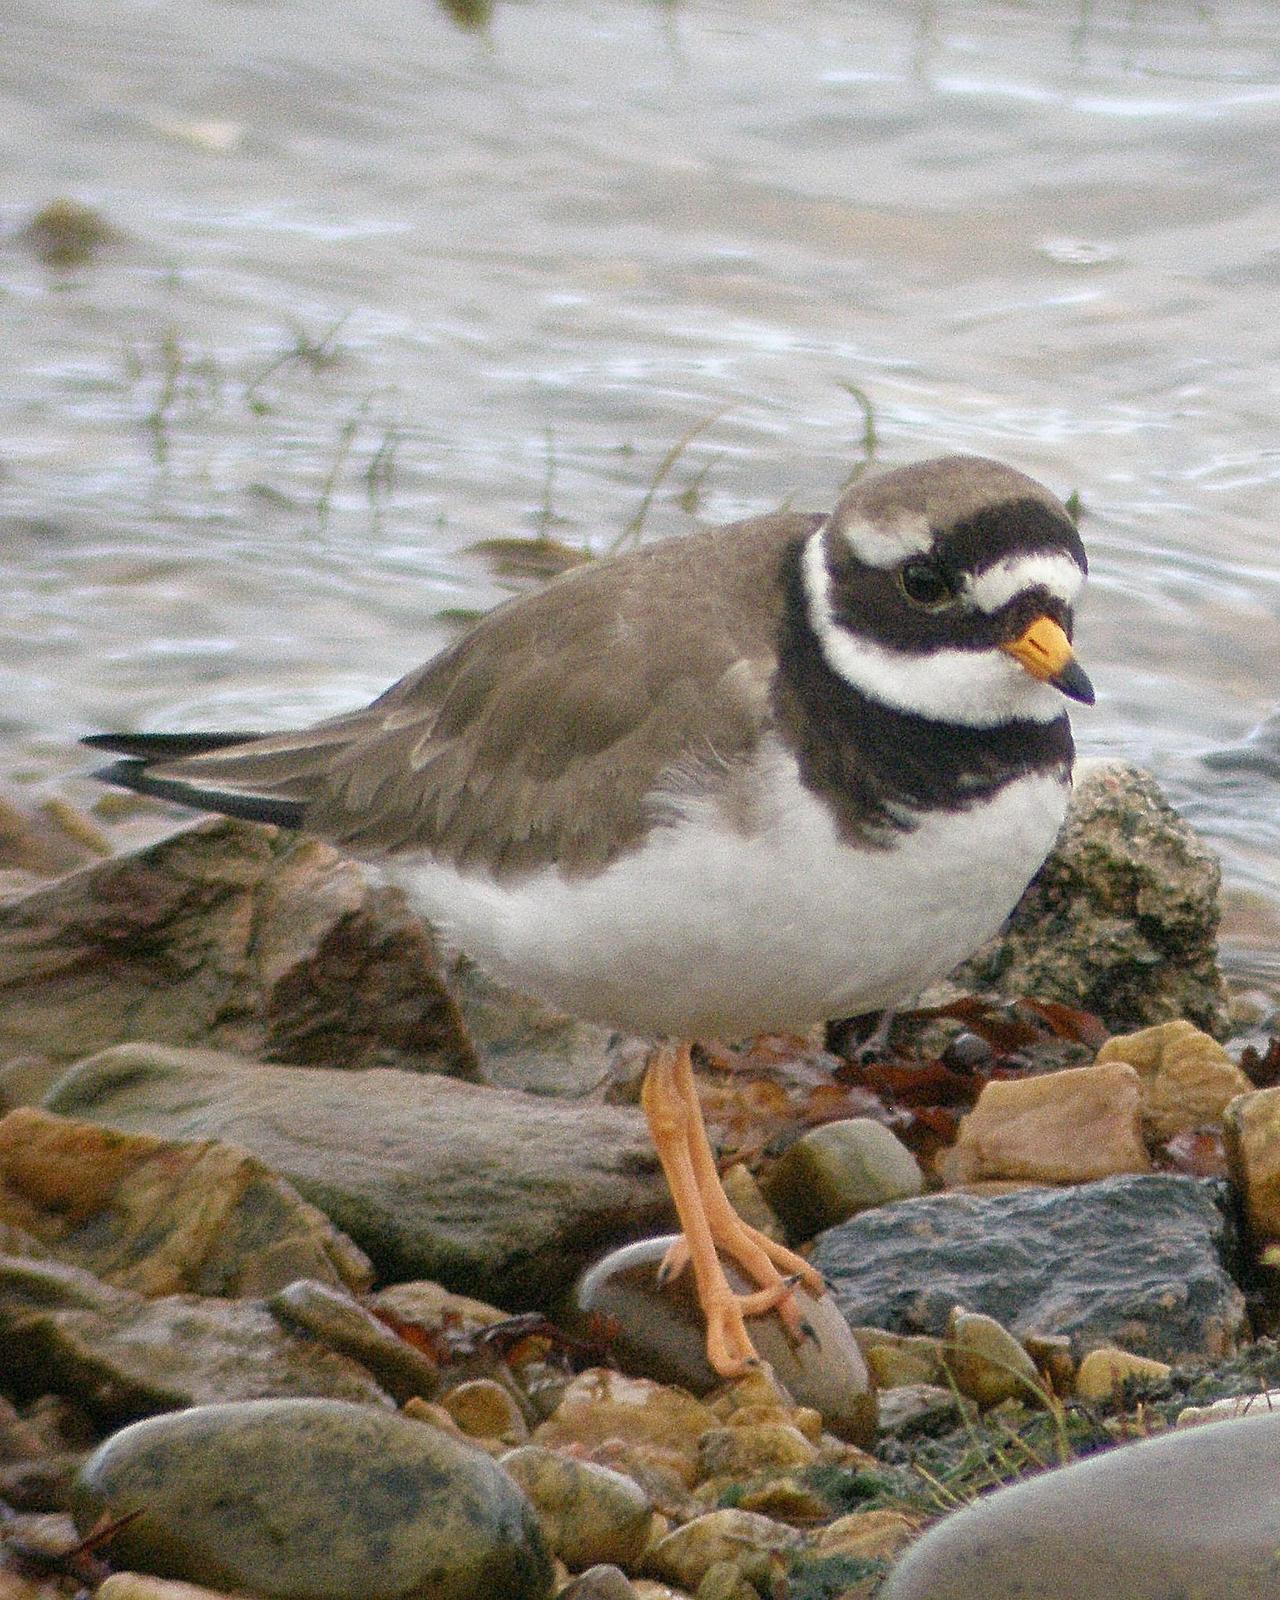 Common Ringed Plover Photo by Steve Percival